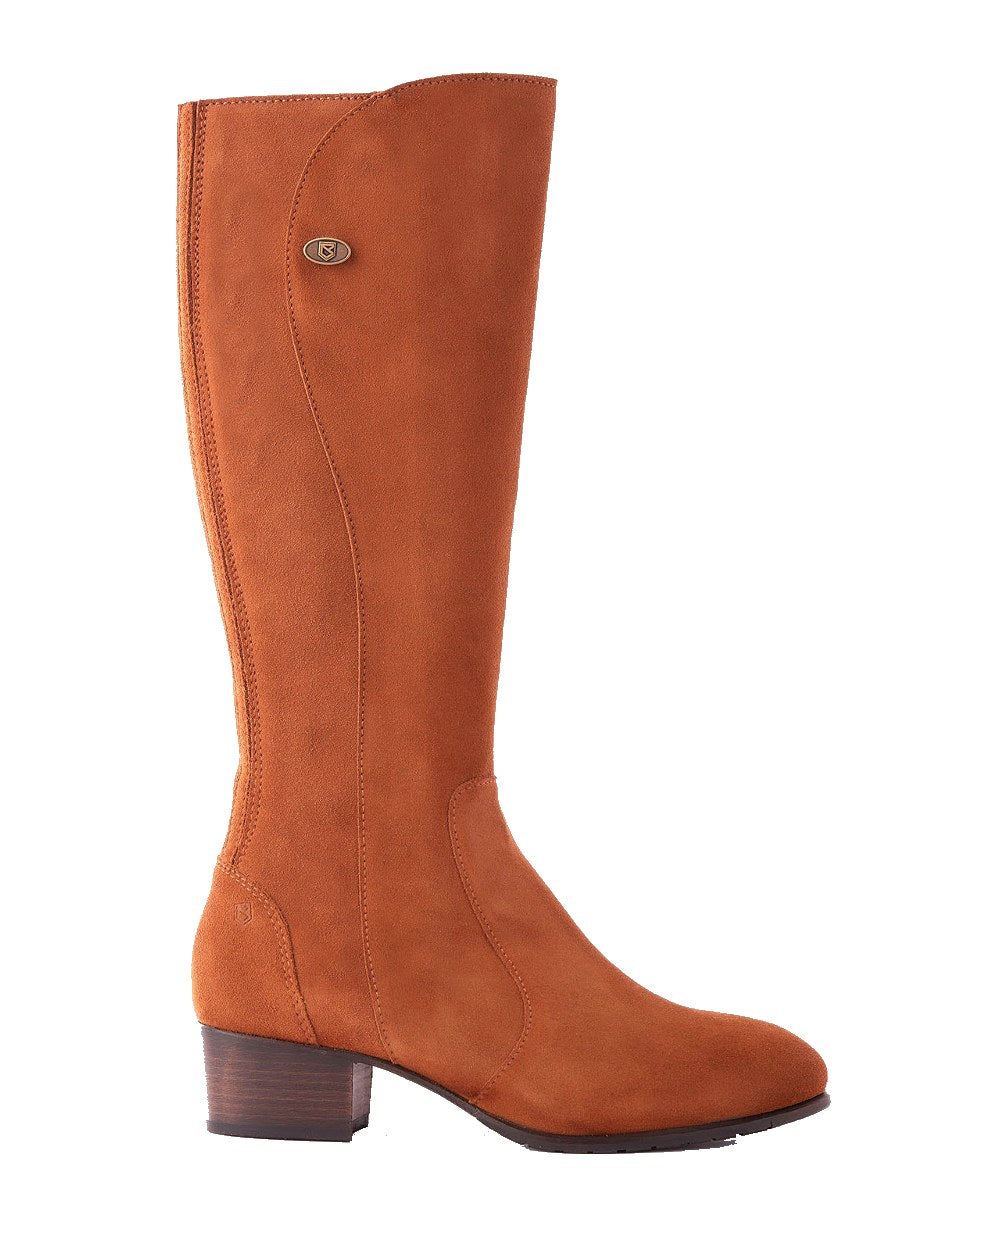 Dubarry Downpatrick Knee High Boots in Camel 